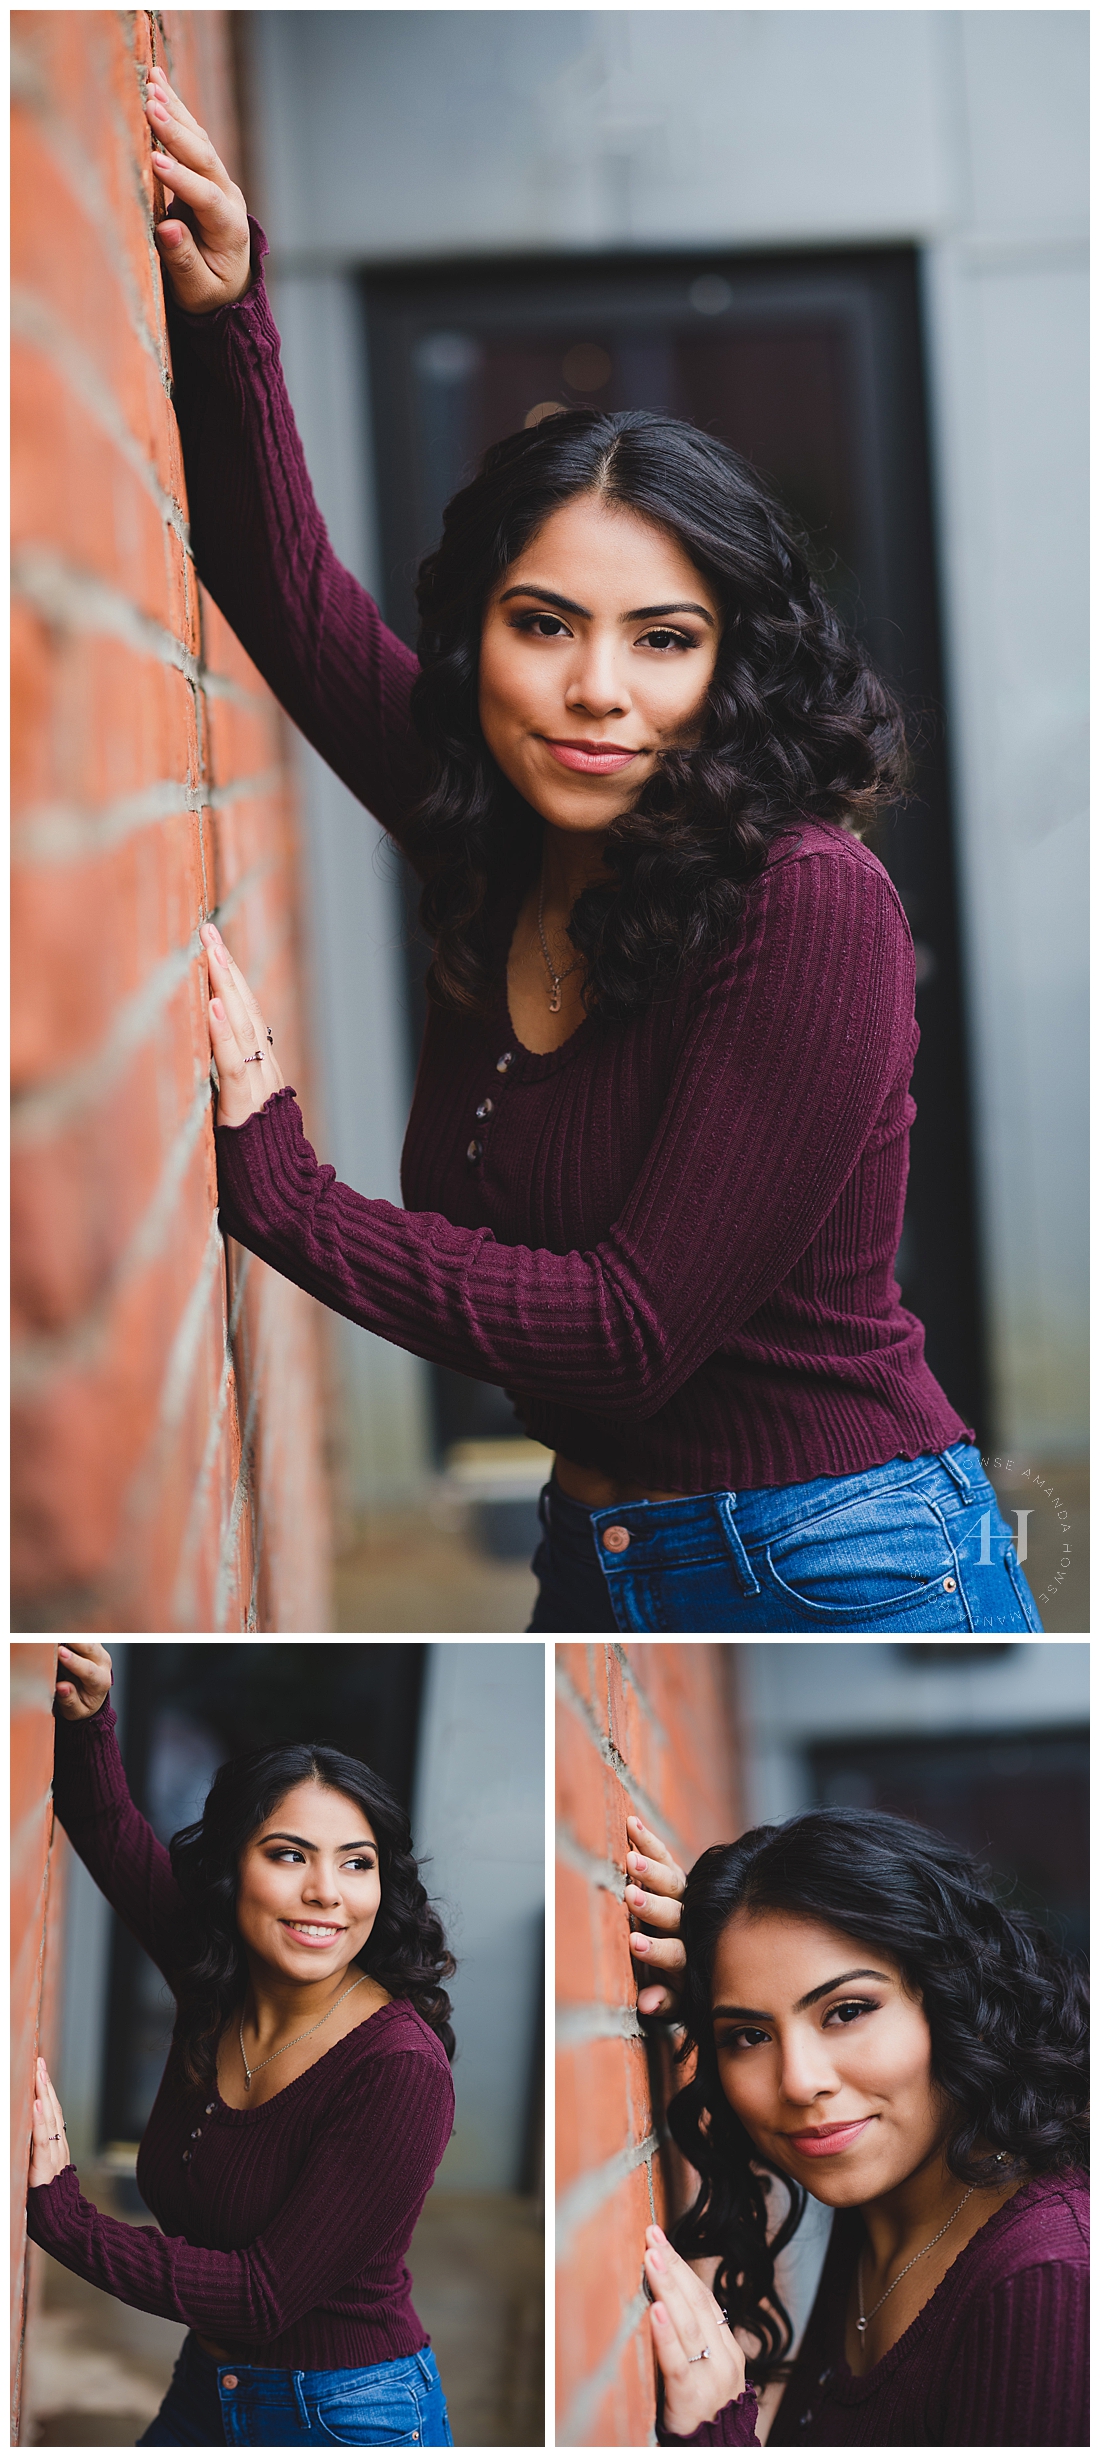 Senior Portraits by a Brick Wall in Tacoma | Photographed by Amanda Howse